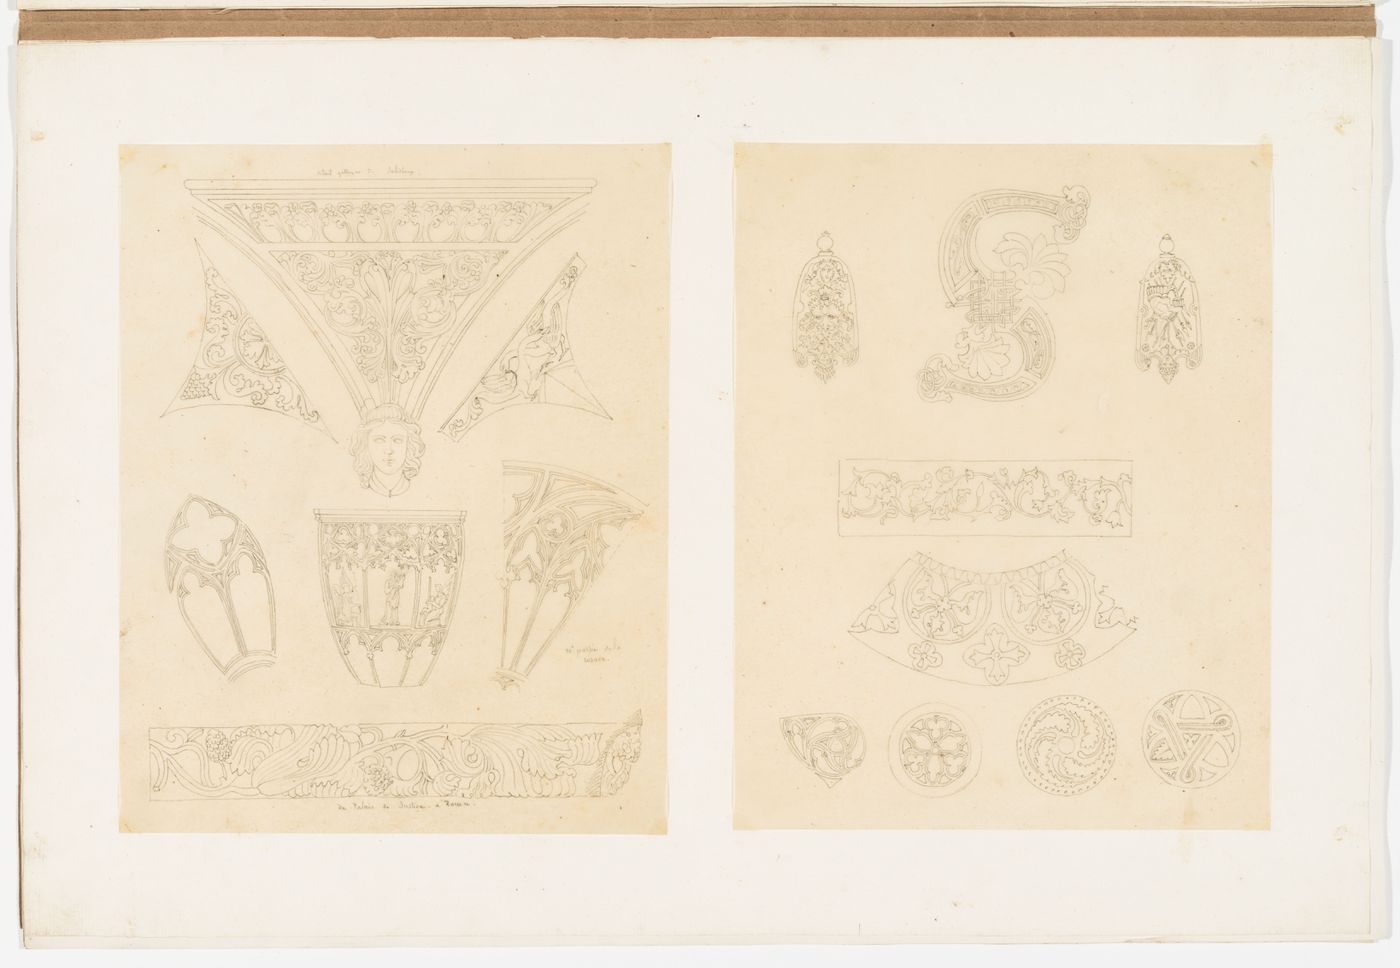 Two drawings of ornament and architectural elements including a spandrel from Salisbury Cathedral, molding from Palais de Justice, Rouen, tracery, roundels, running ornament, and a decorated initial letter